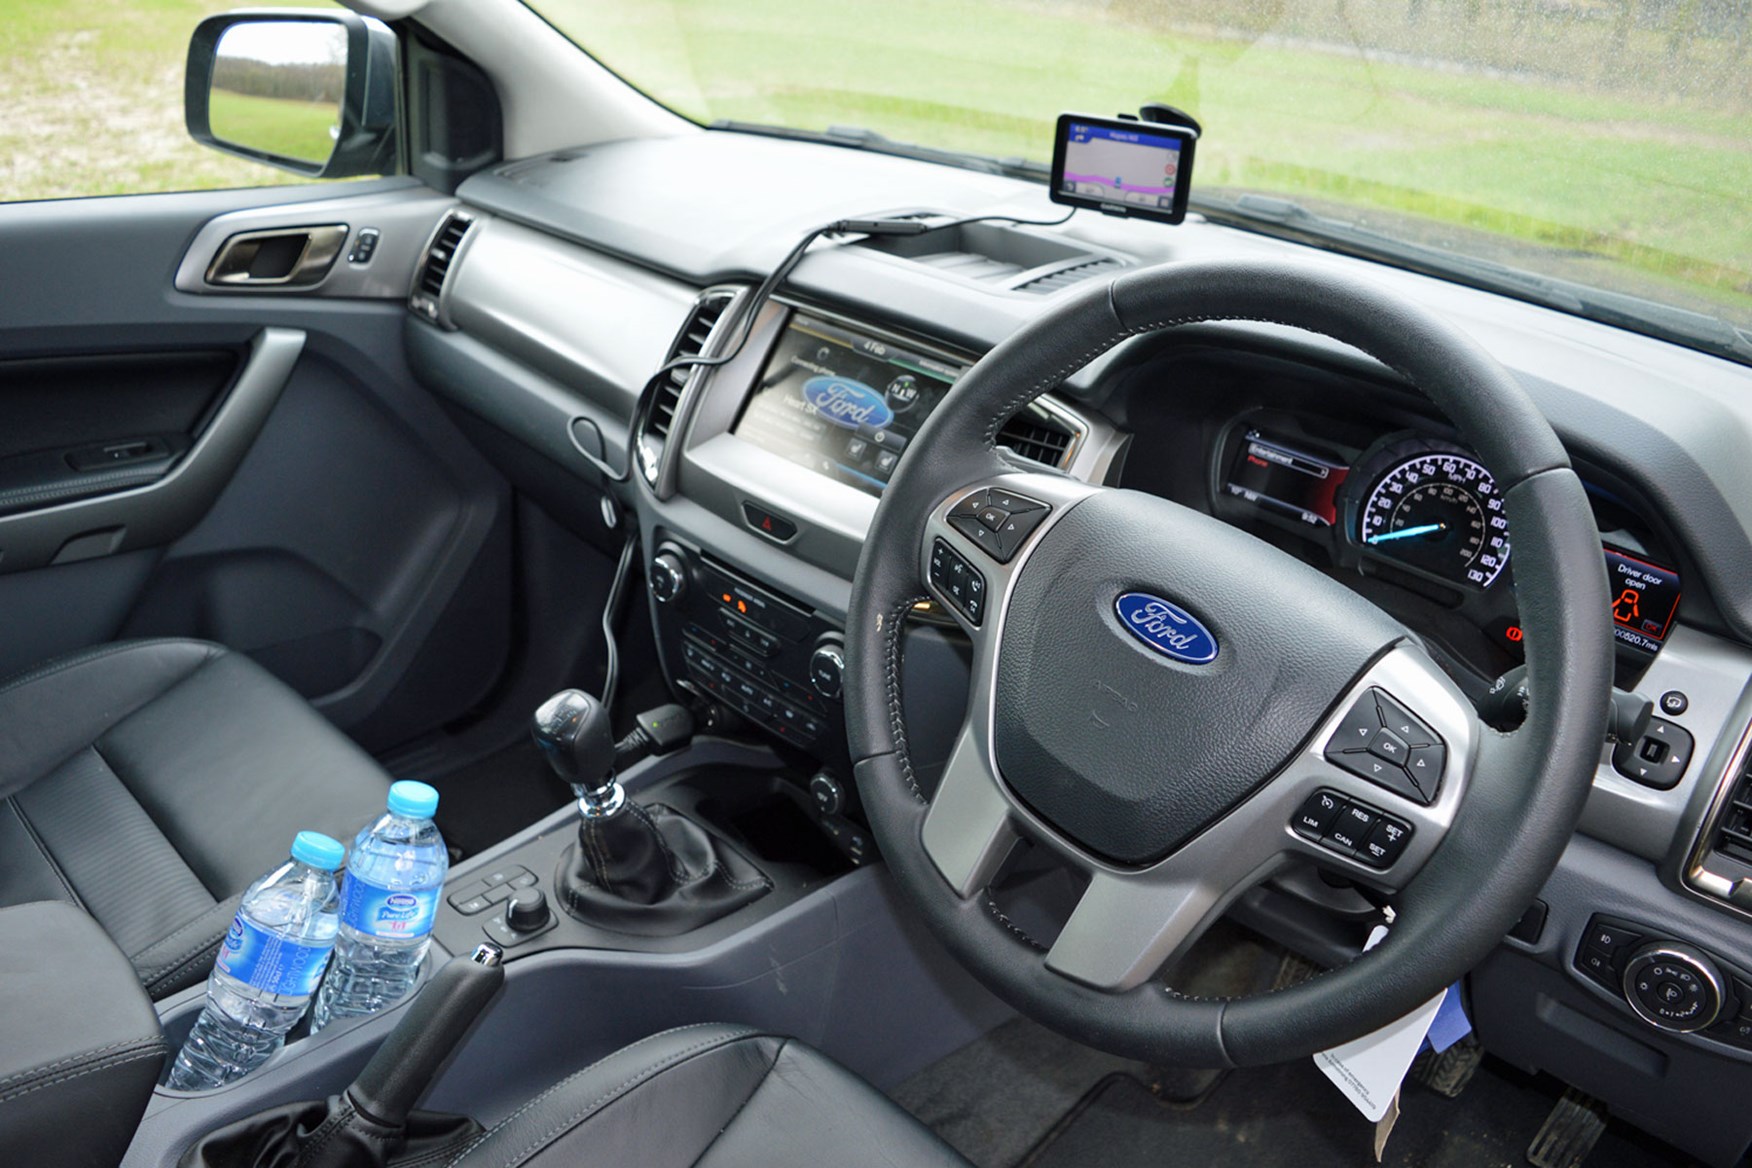 Ford Ranger Limited 3.2 Euro 5 review - cab interior